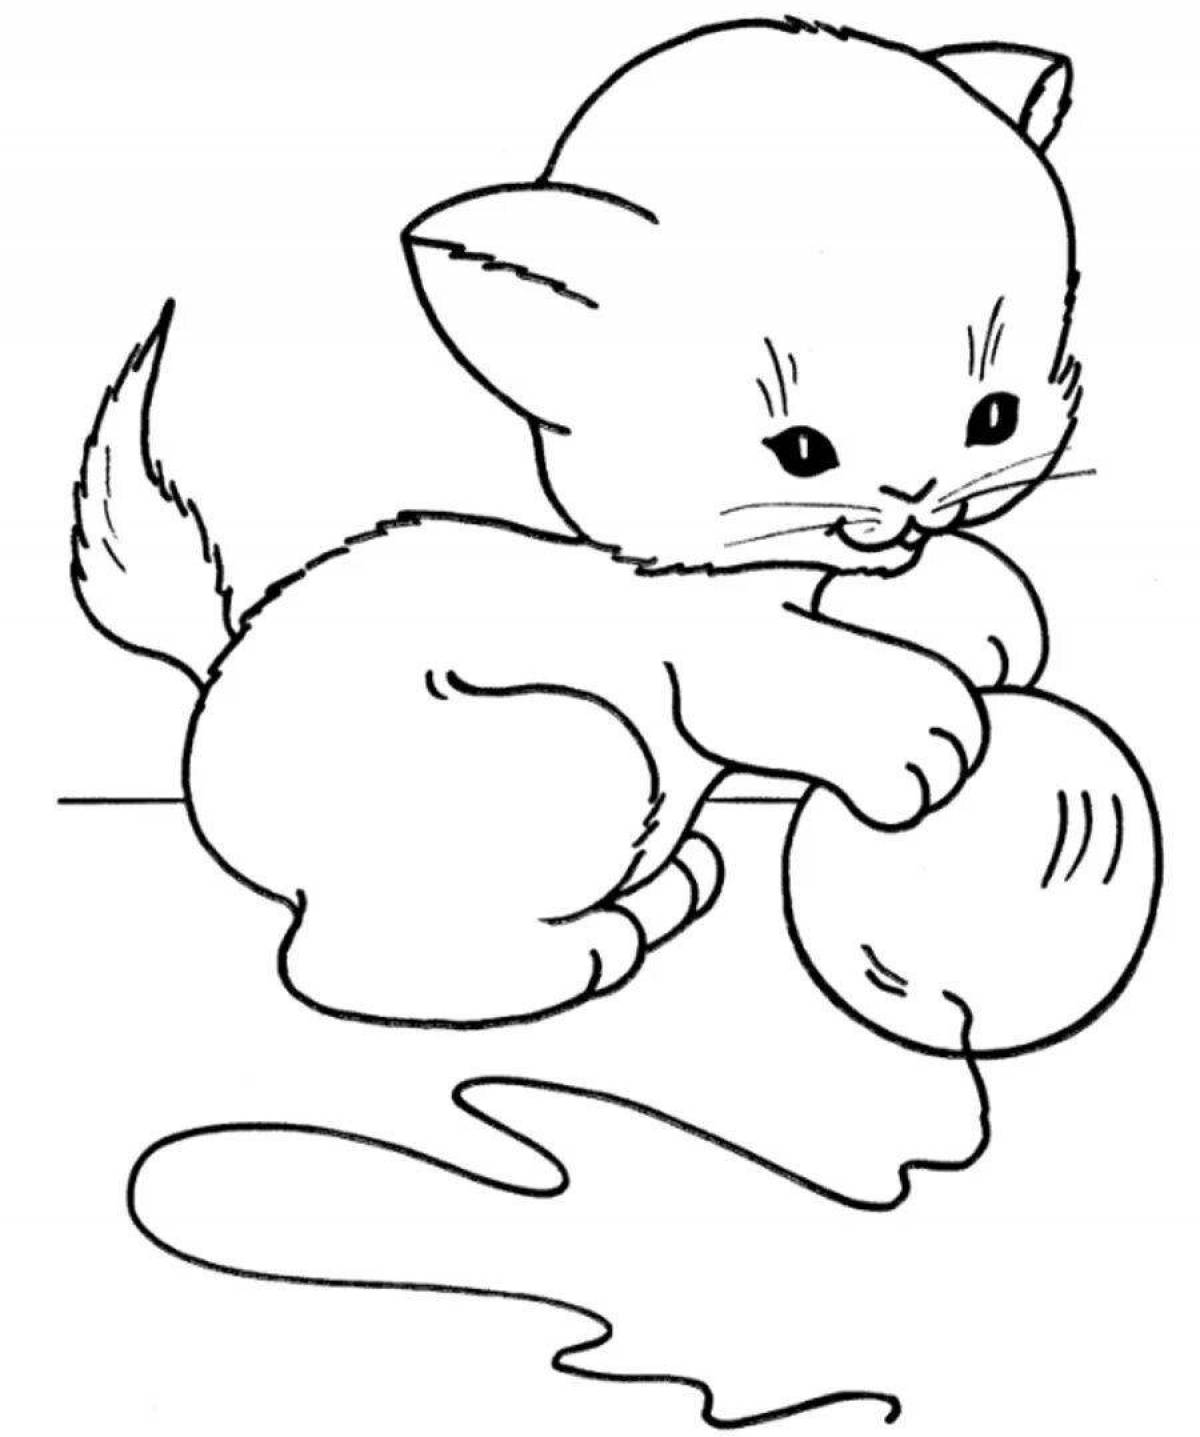 Coloring cat friendly for kids